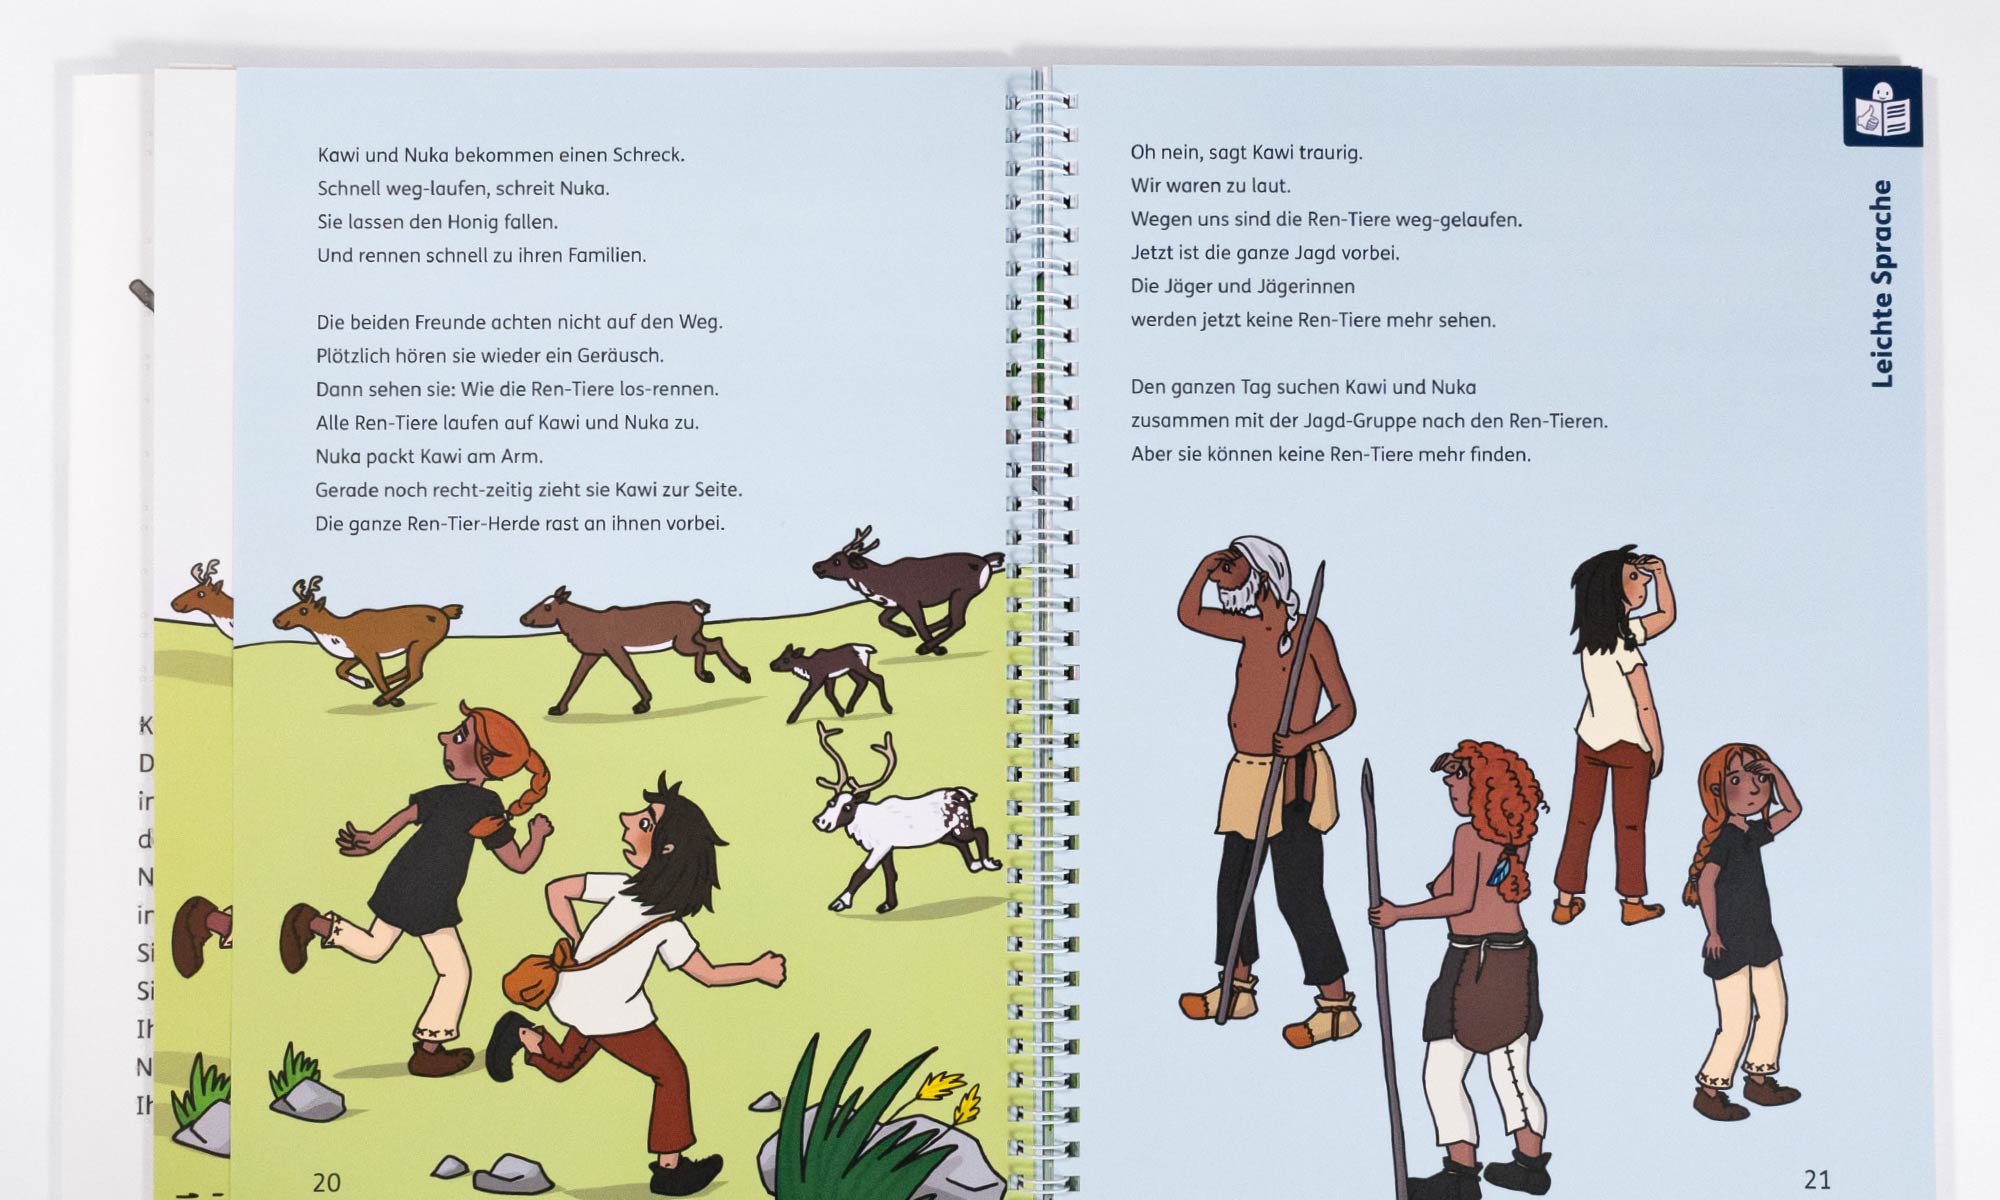 Picture of a double page of Easy Language page. There are illustrations and the text from the previous page as easy-to-read text.